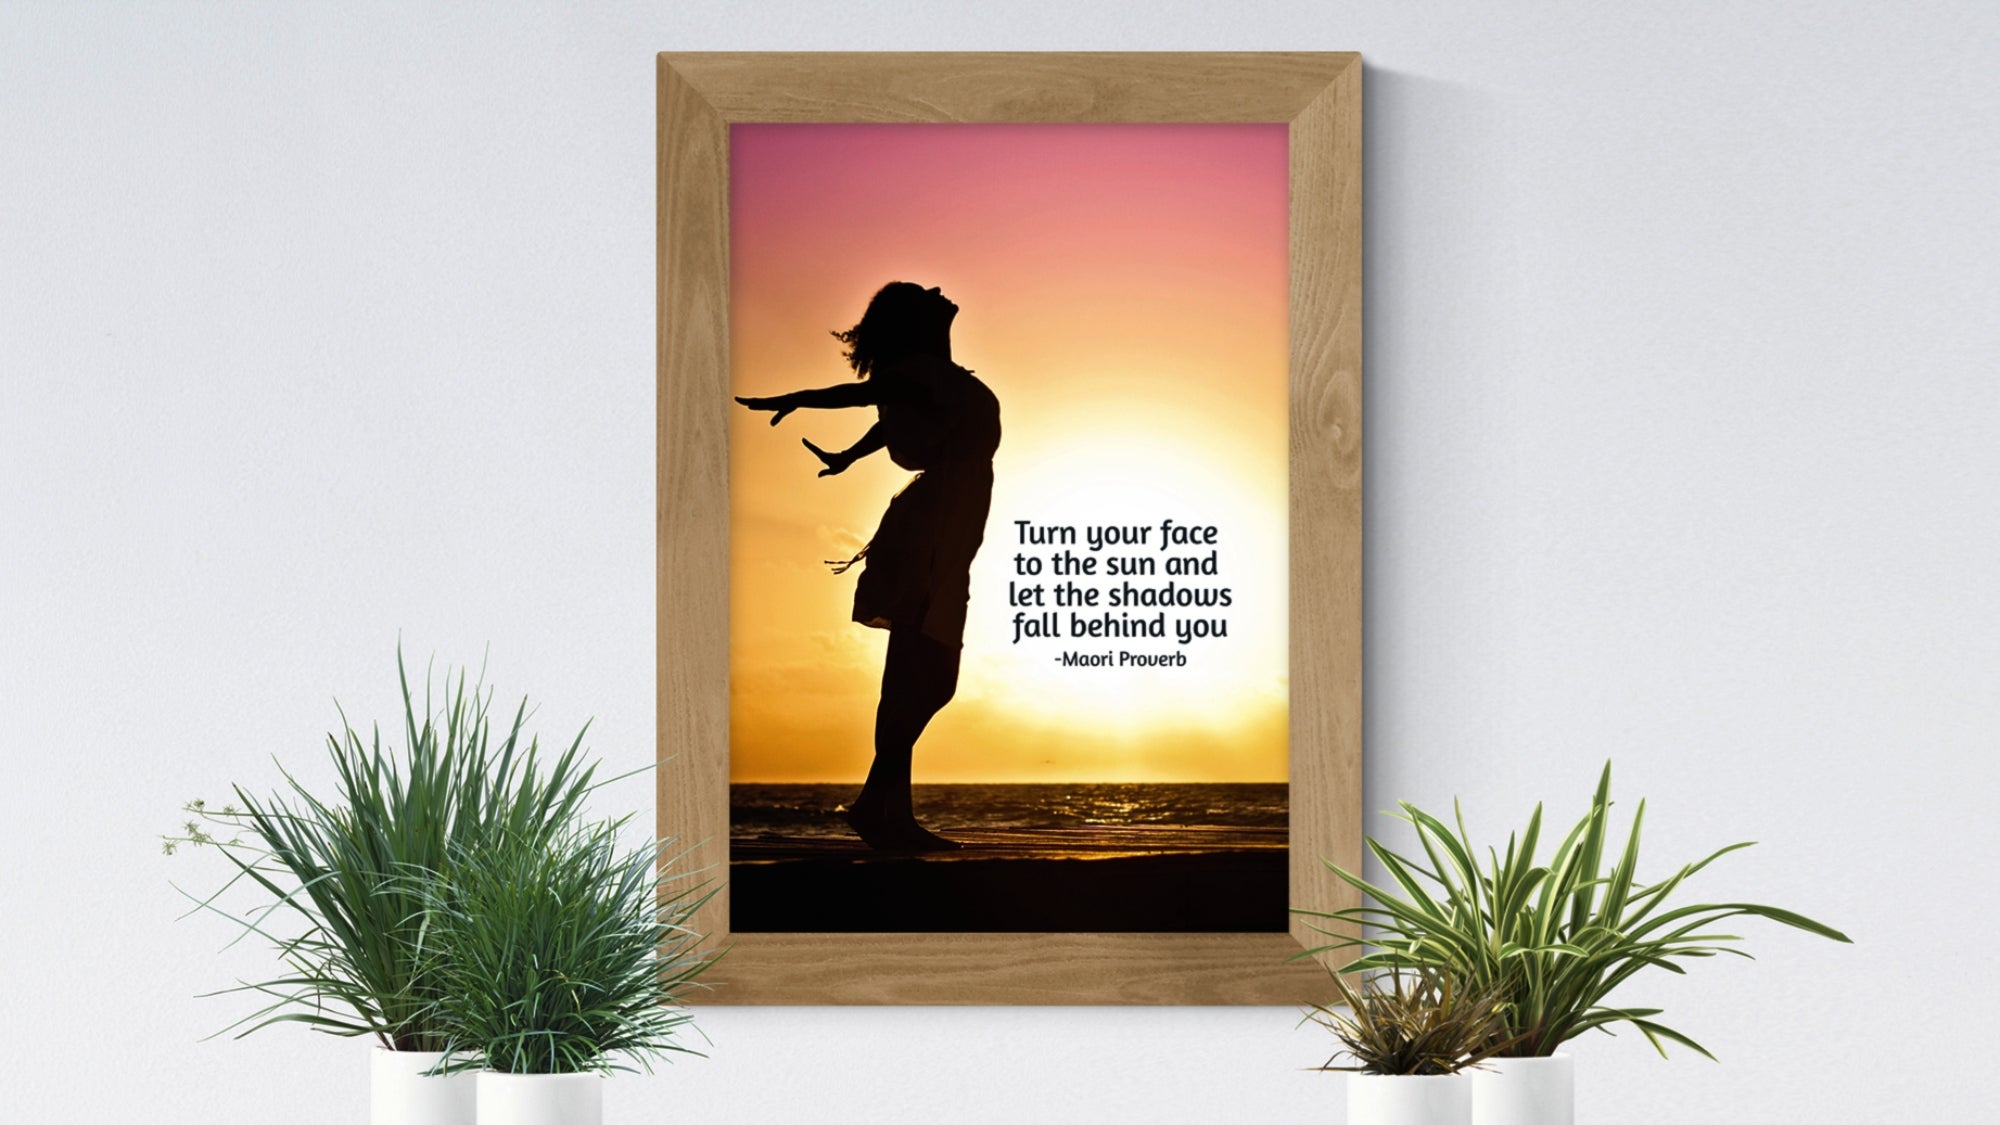 Change your thought Inspirational Wall Art Print Motivational Quote Poster Decor 